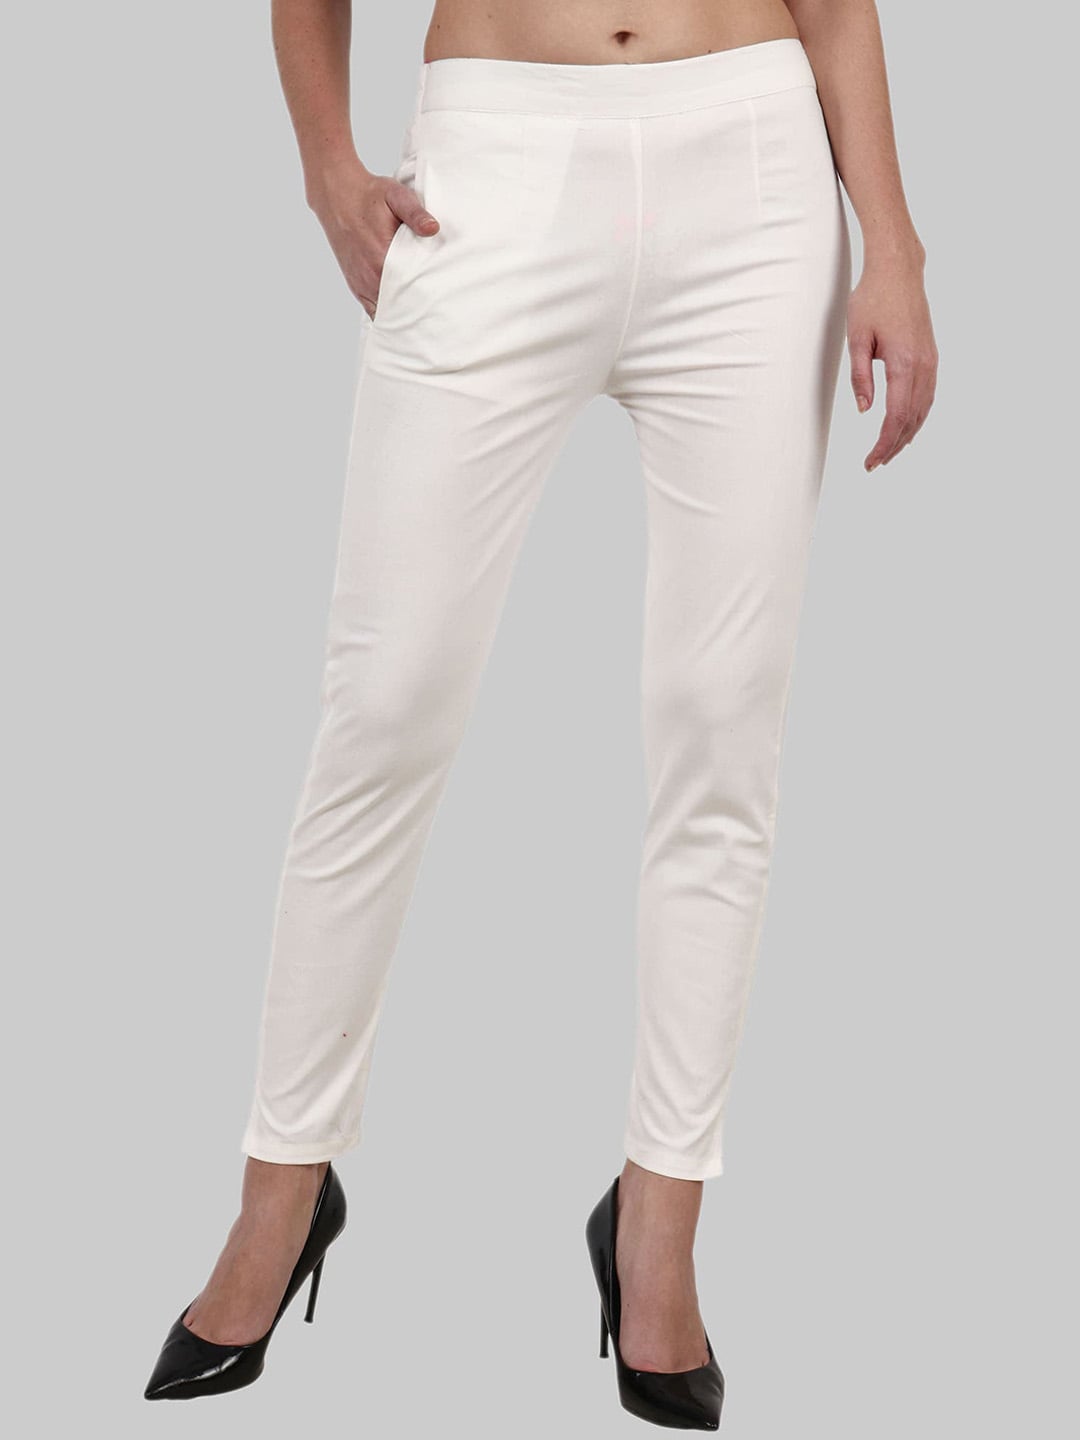 Popwings Women Stretchable Cigarette Trousers